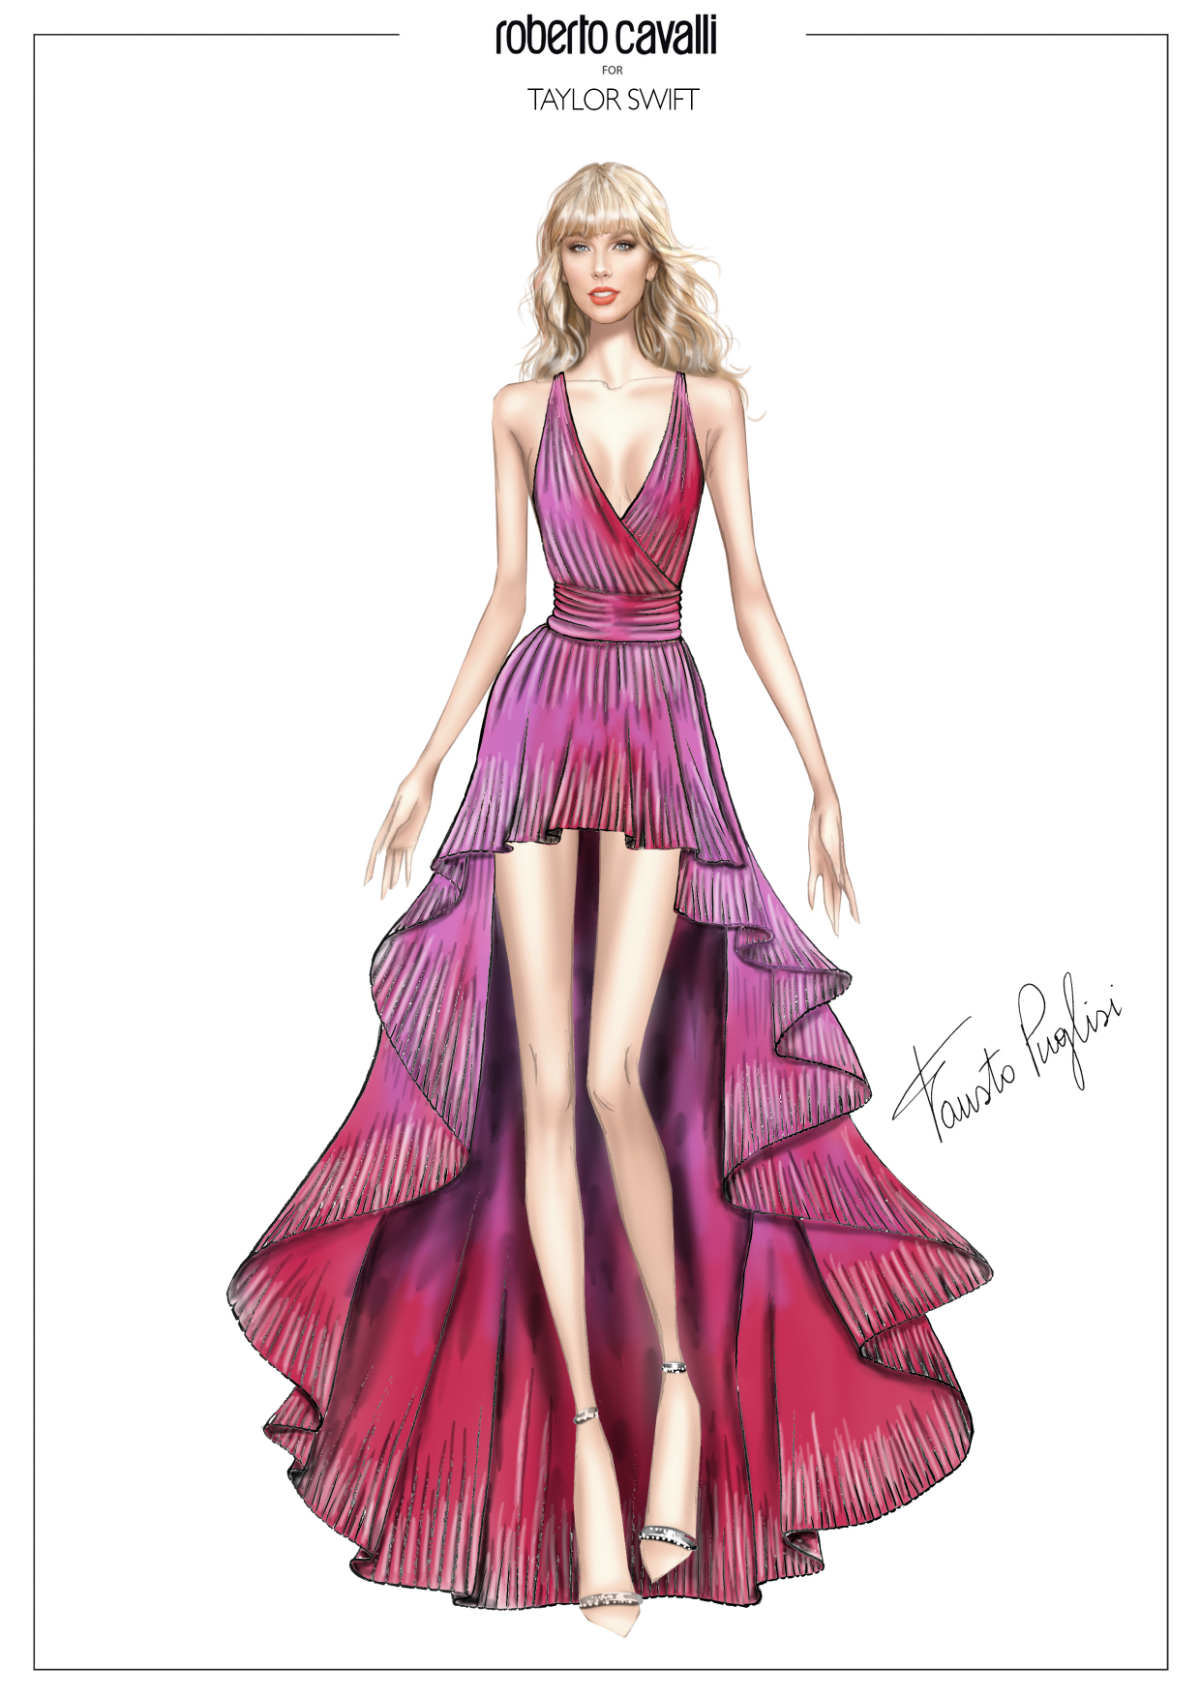 Taylor Swift In Custom Roberto Cavalli Couture At The Kick Off Date Of The Eras European Tour